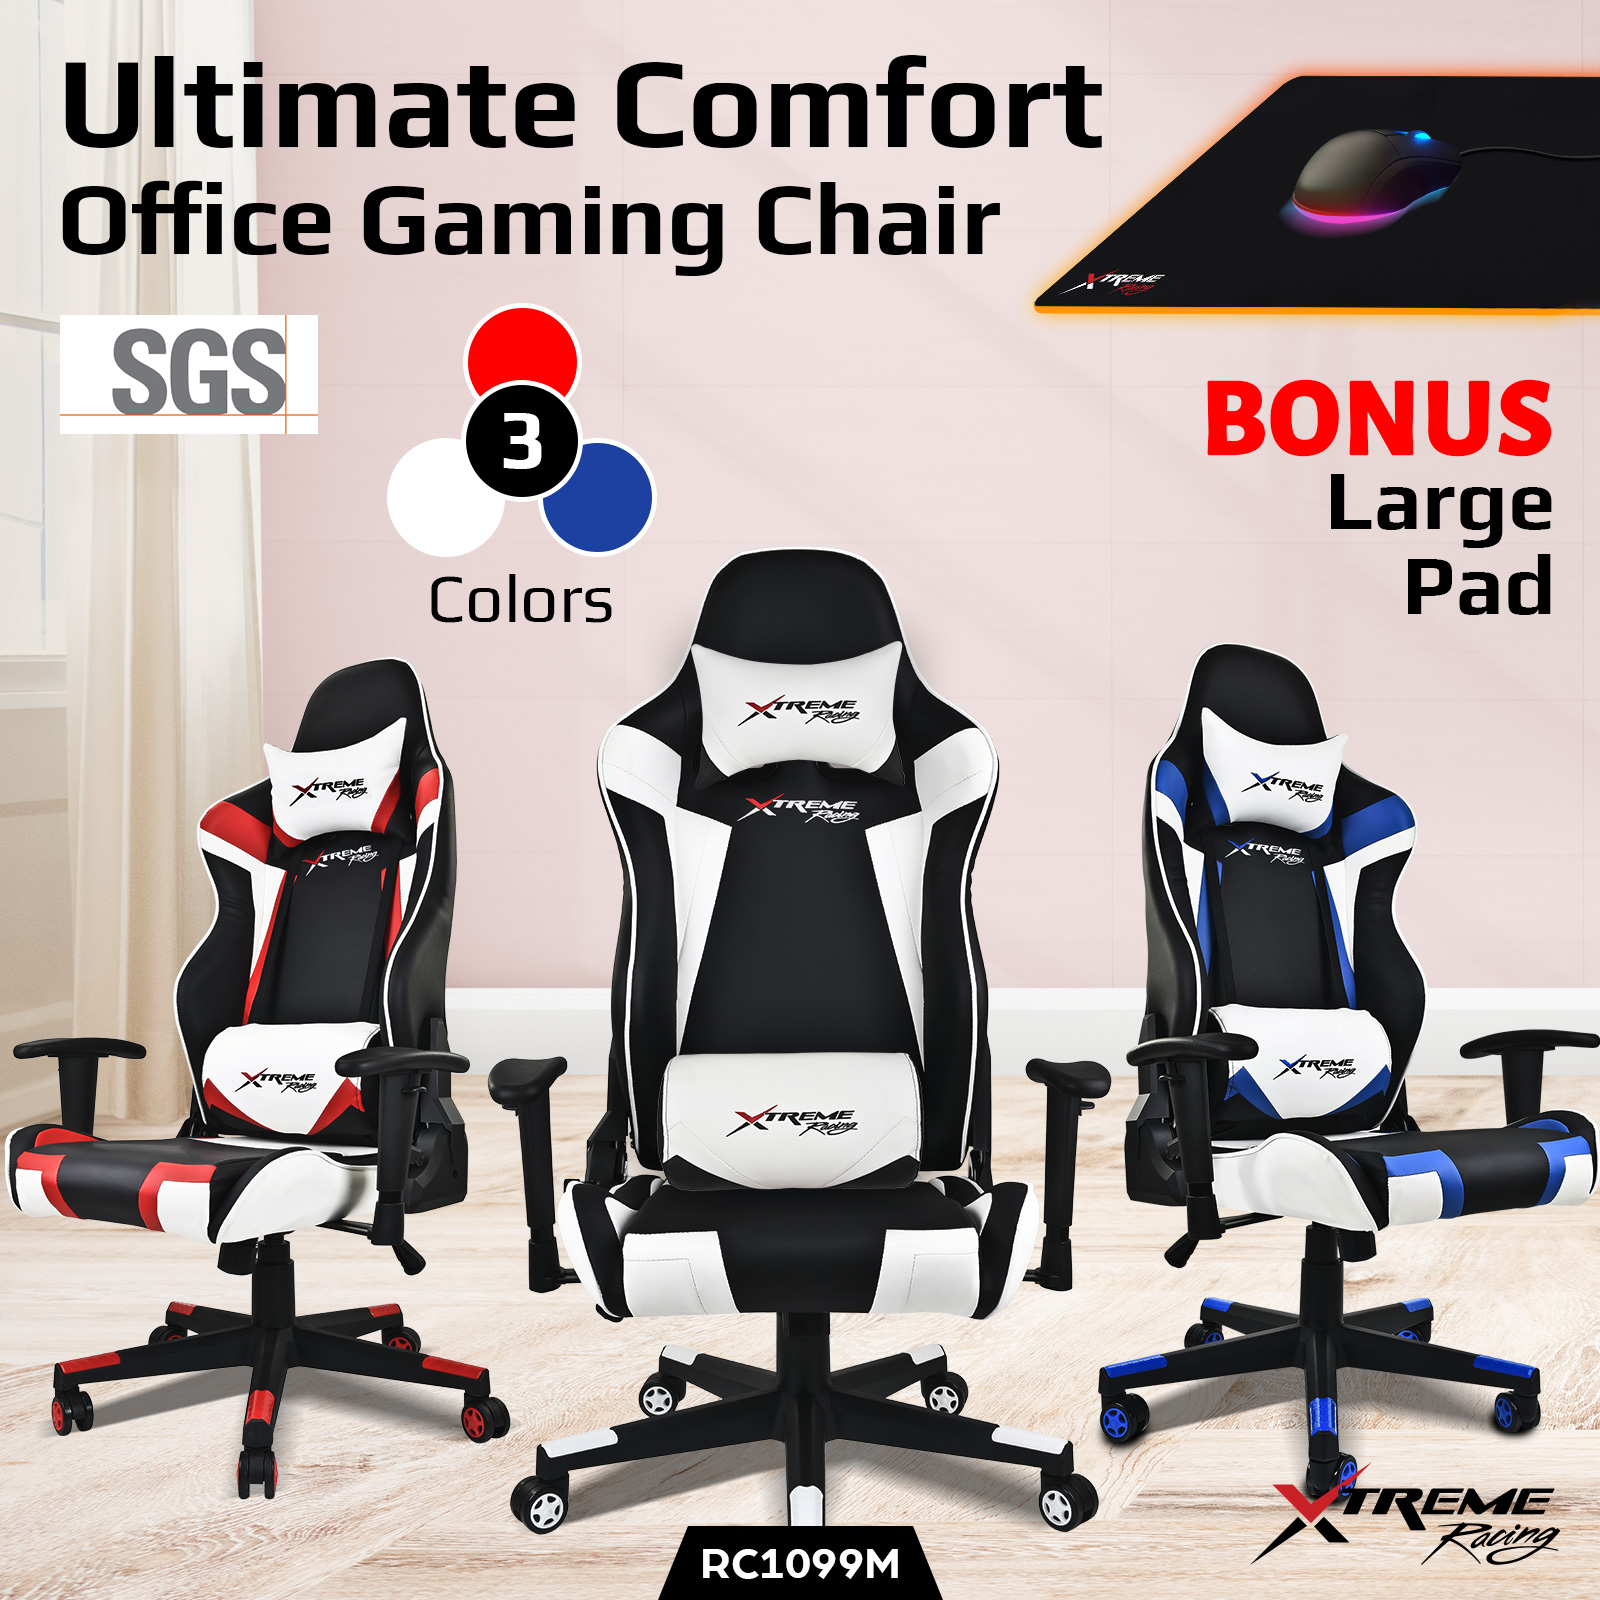 Xtreme Racing Ultimate Gaming Chair With Mouse Pad For Sale